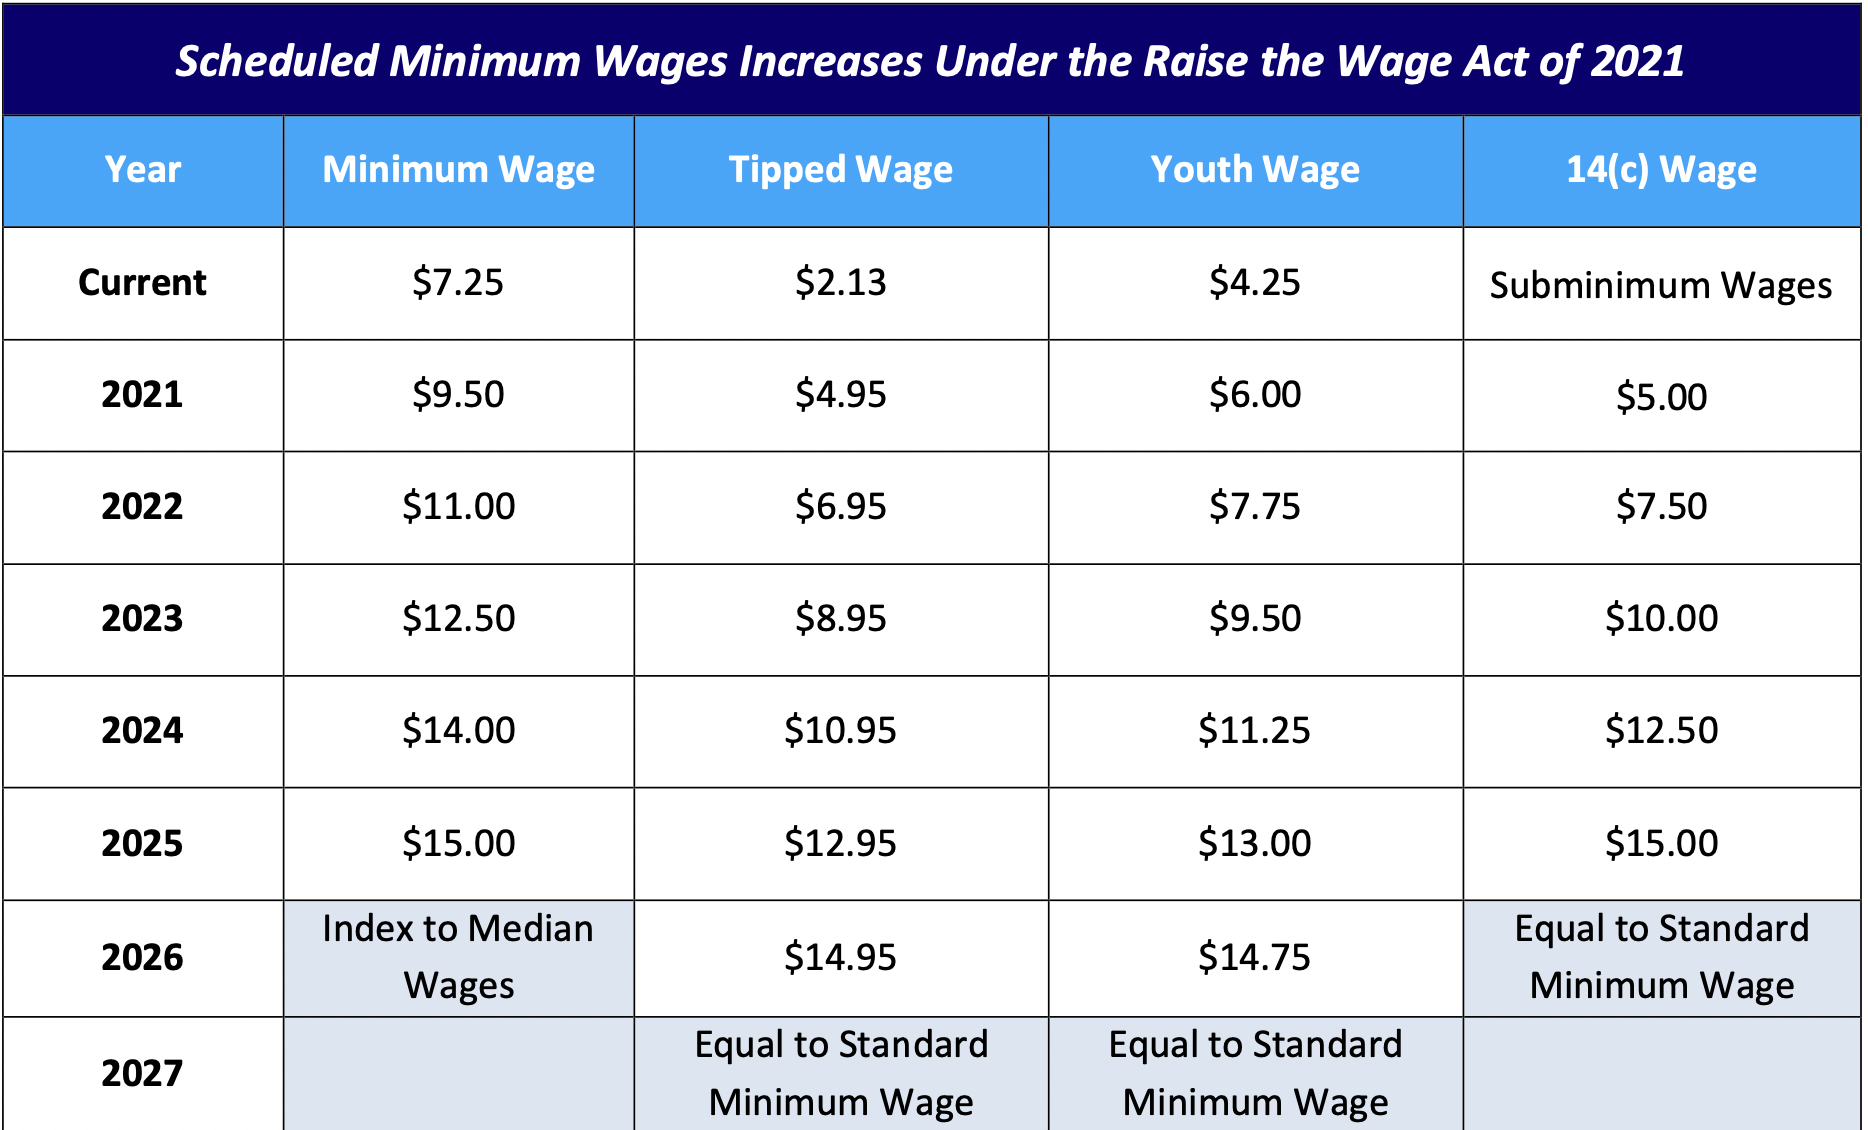 top-democrats-introduce-a-bill-to-raise-the-minimum-wage-to-15-by-2025-raising-pay-for-32